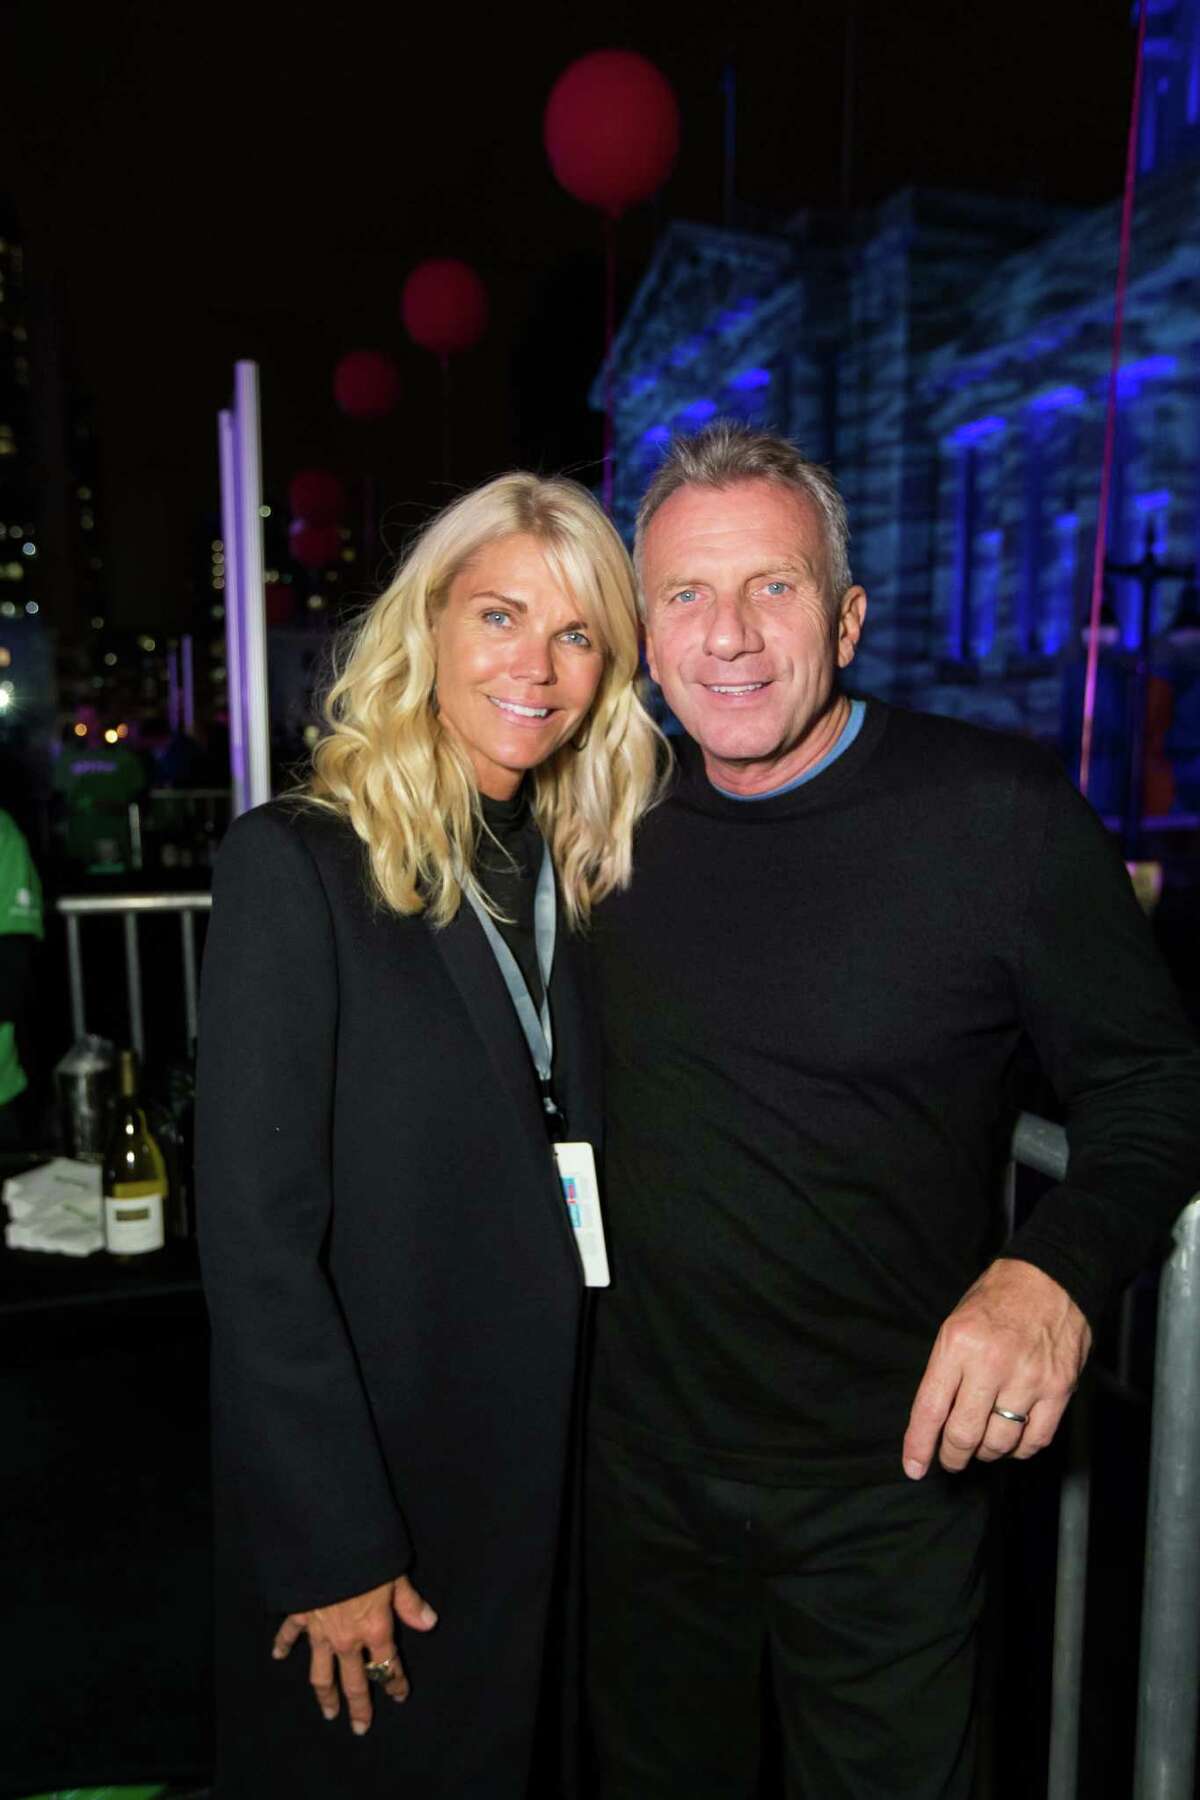 Jennifer Montana and Joe Montana at the Concert for UCSF Benioff Children's Hospitals at Civic Center Plaza on October 14, 2014.